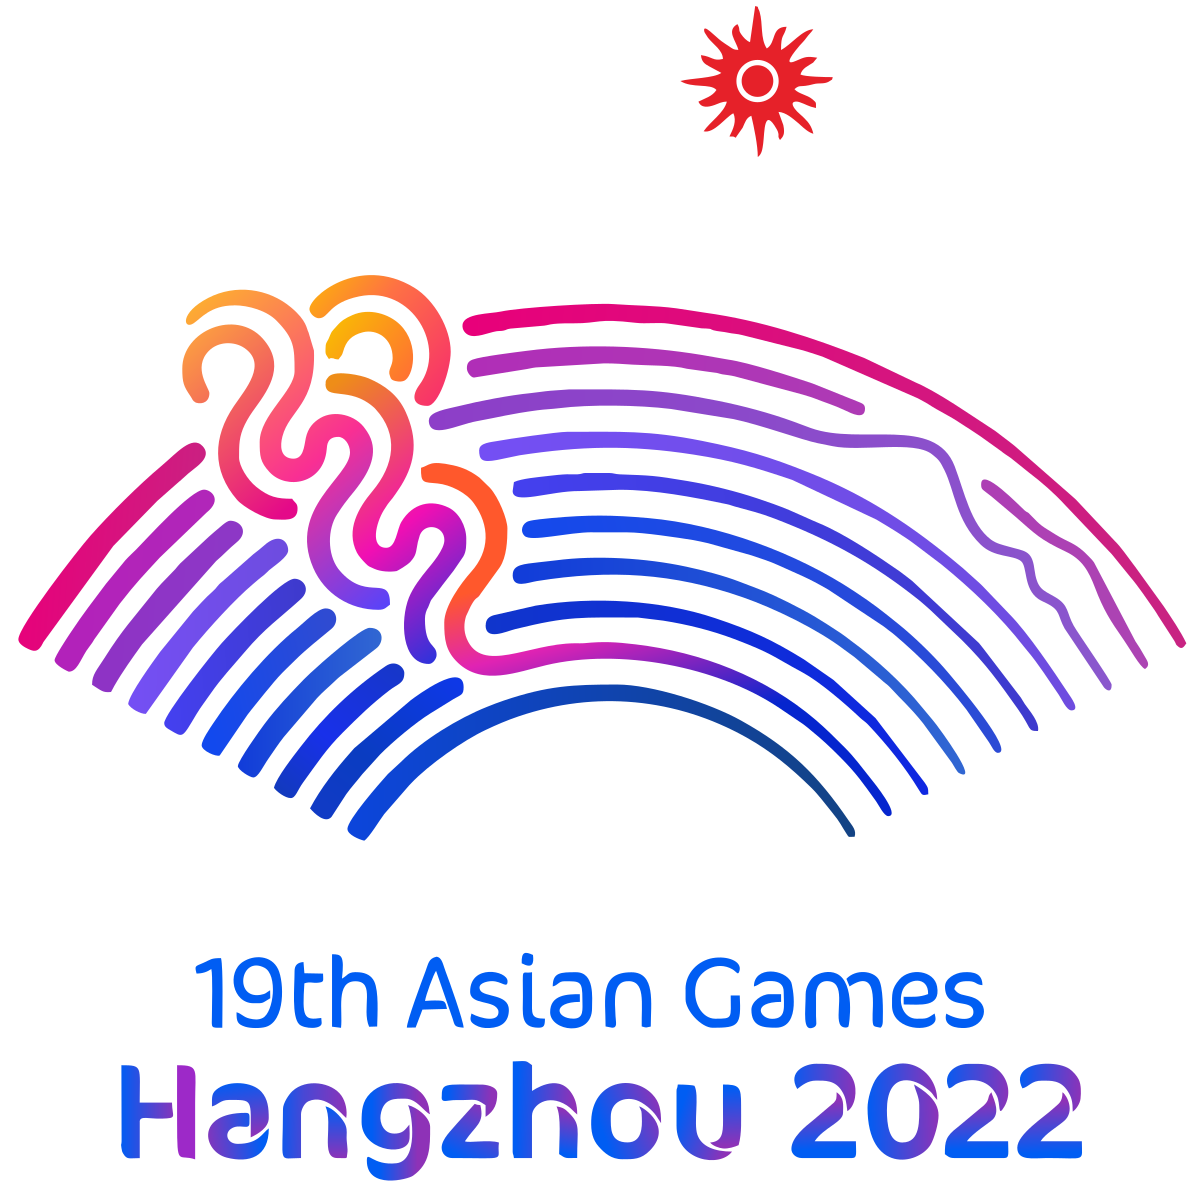 China to host Asian Games in 2023 after Covid postponement Macau Business